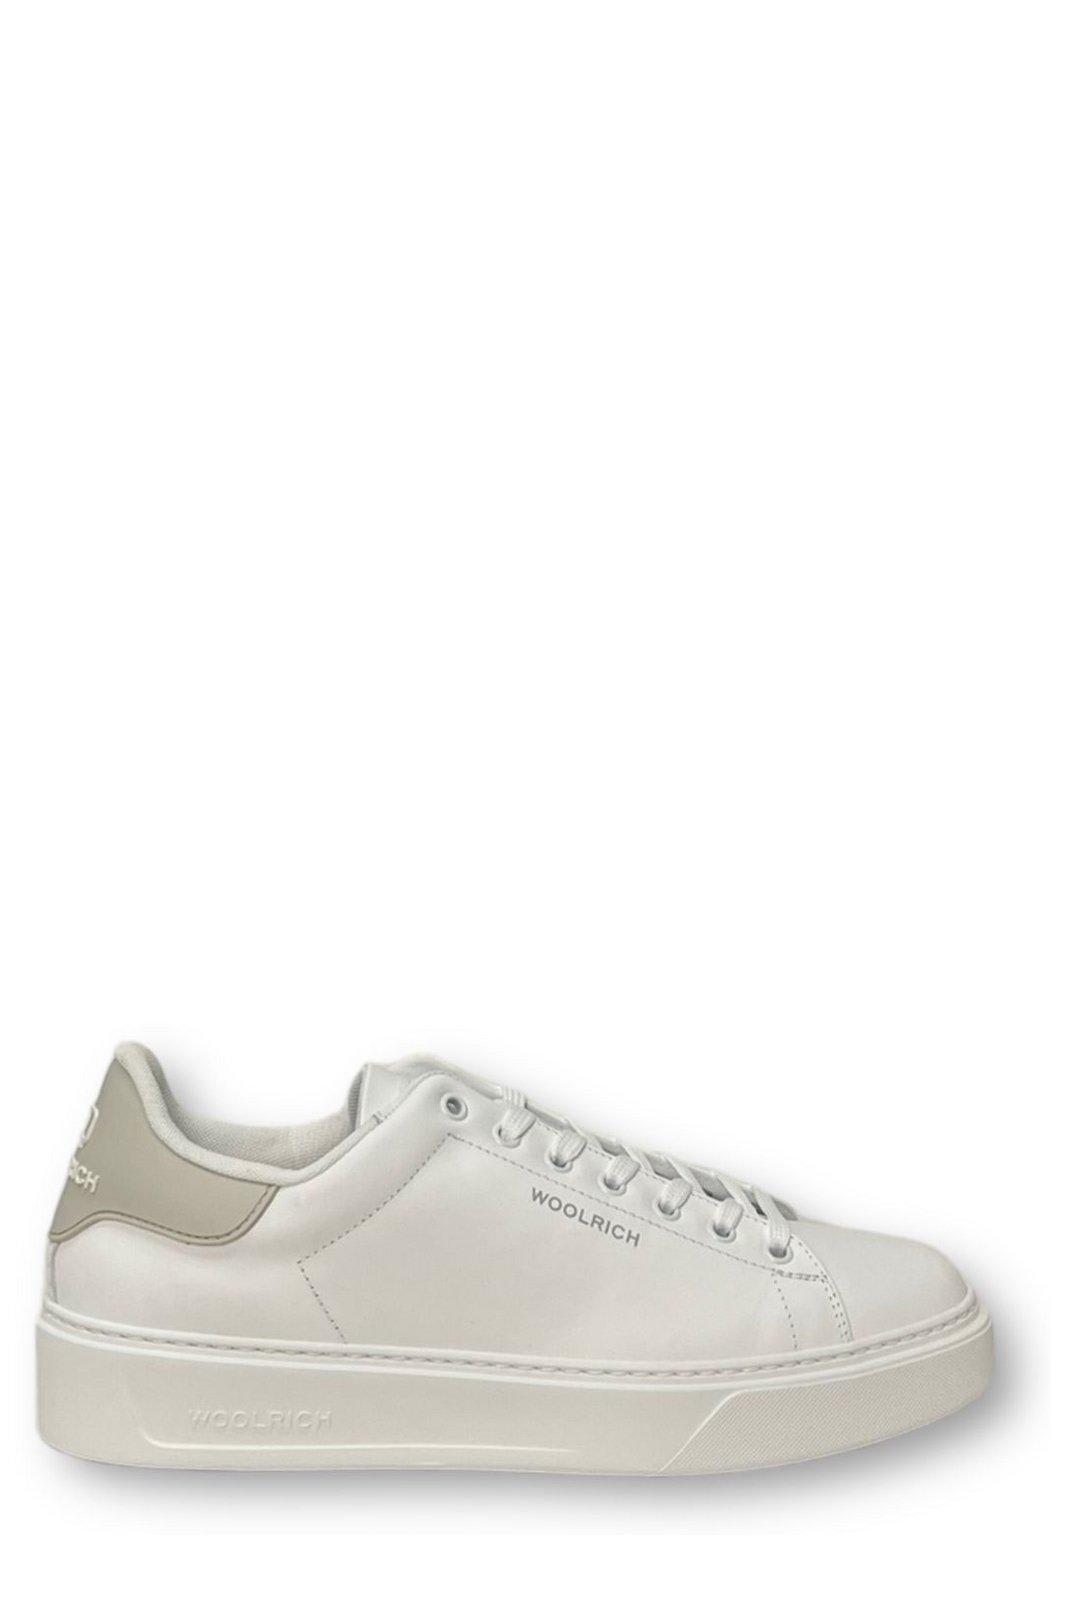 Shop Woolrich Round Toe Lace-up Sneakers In White